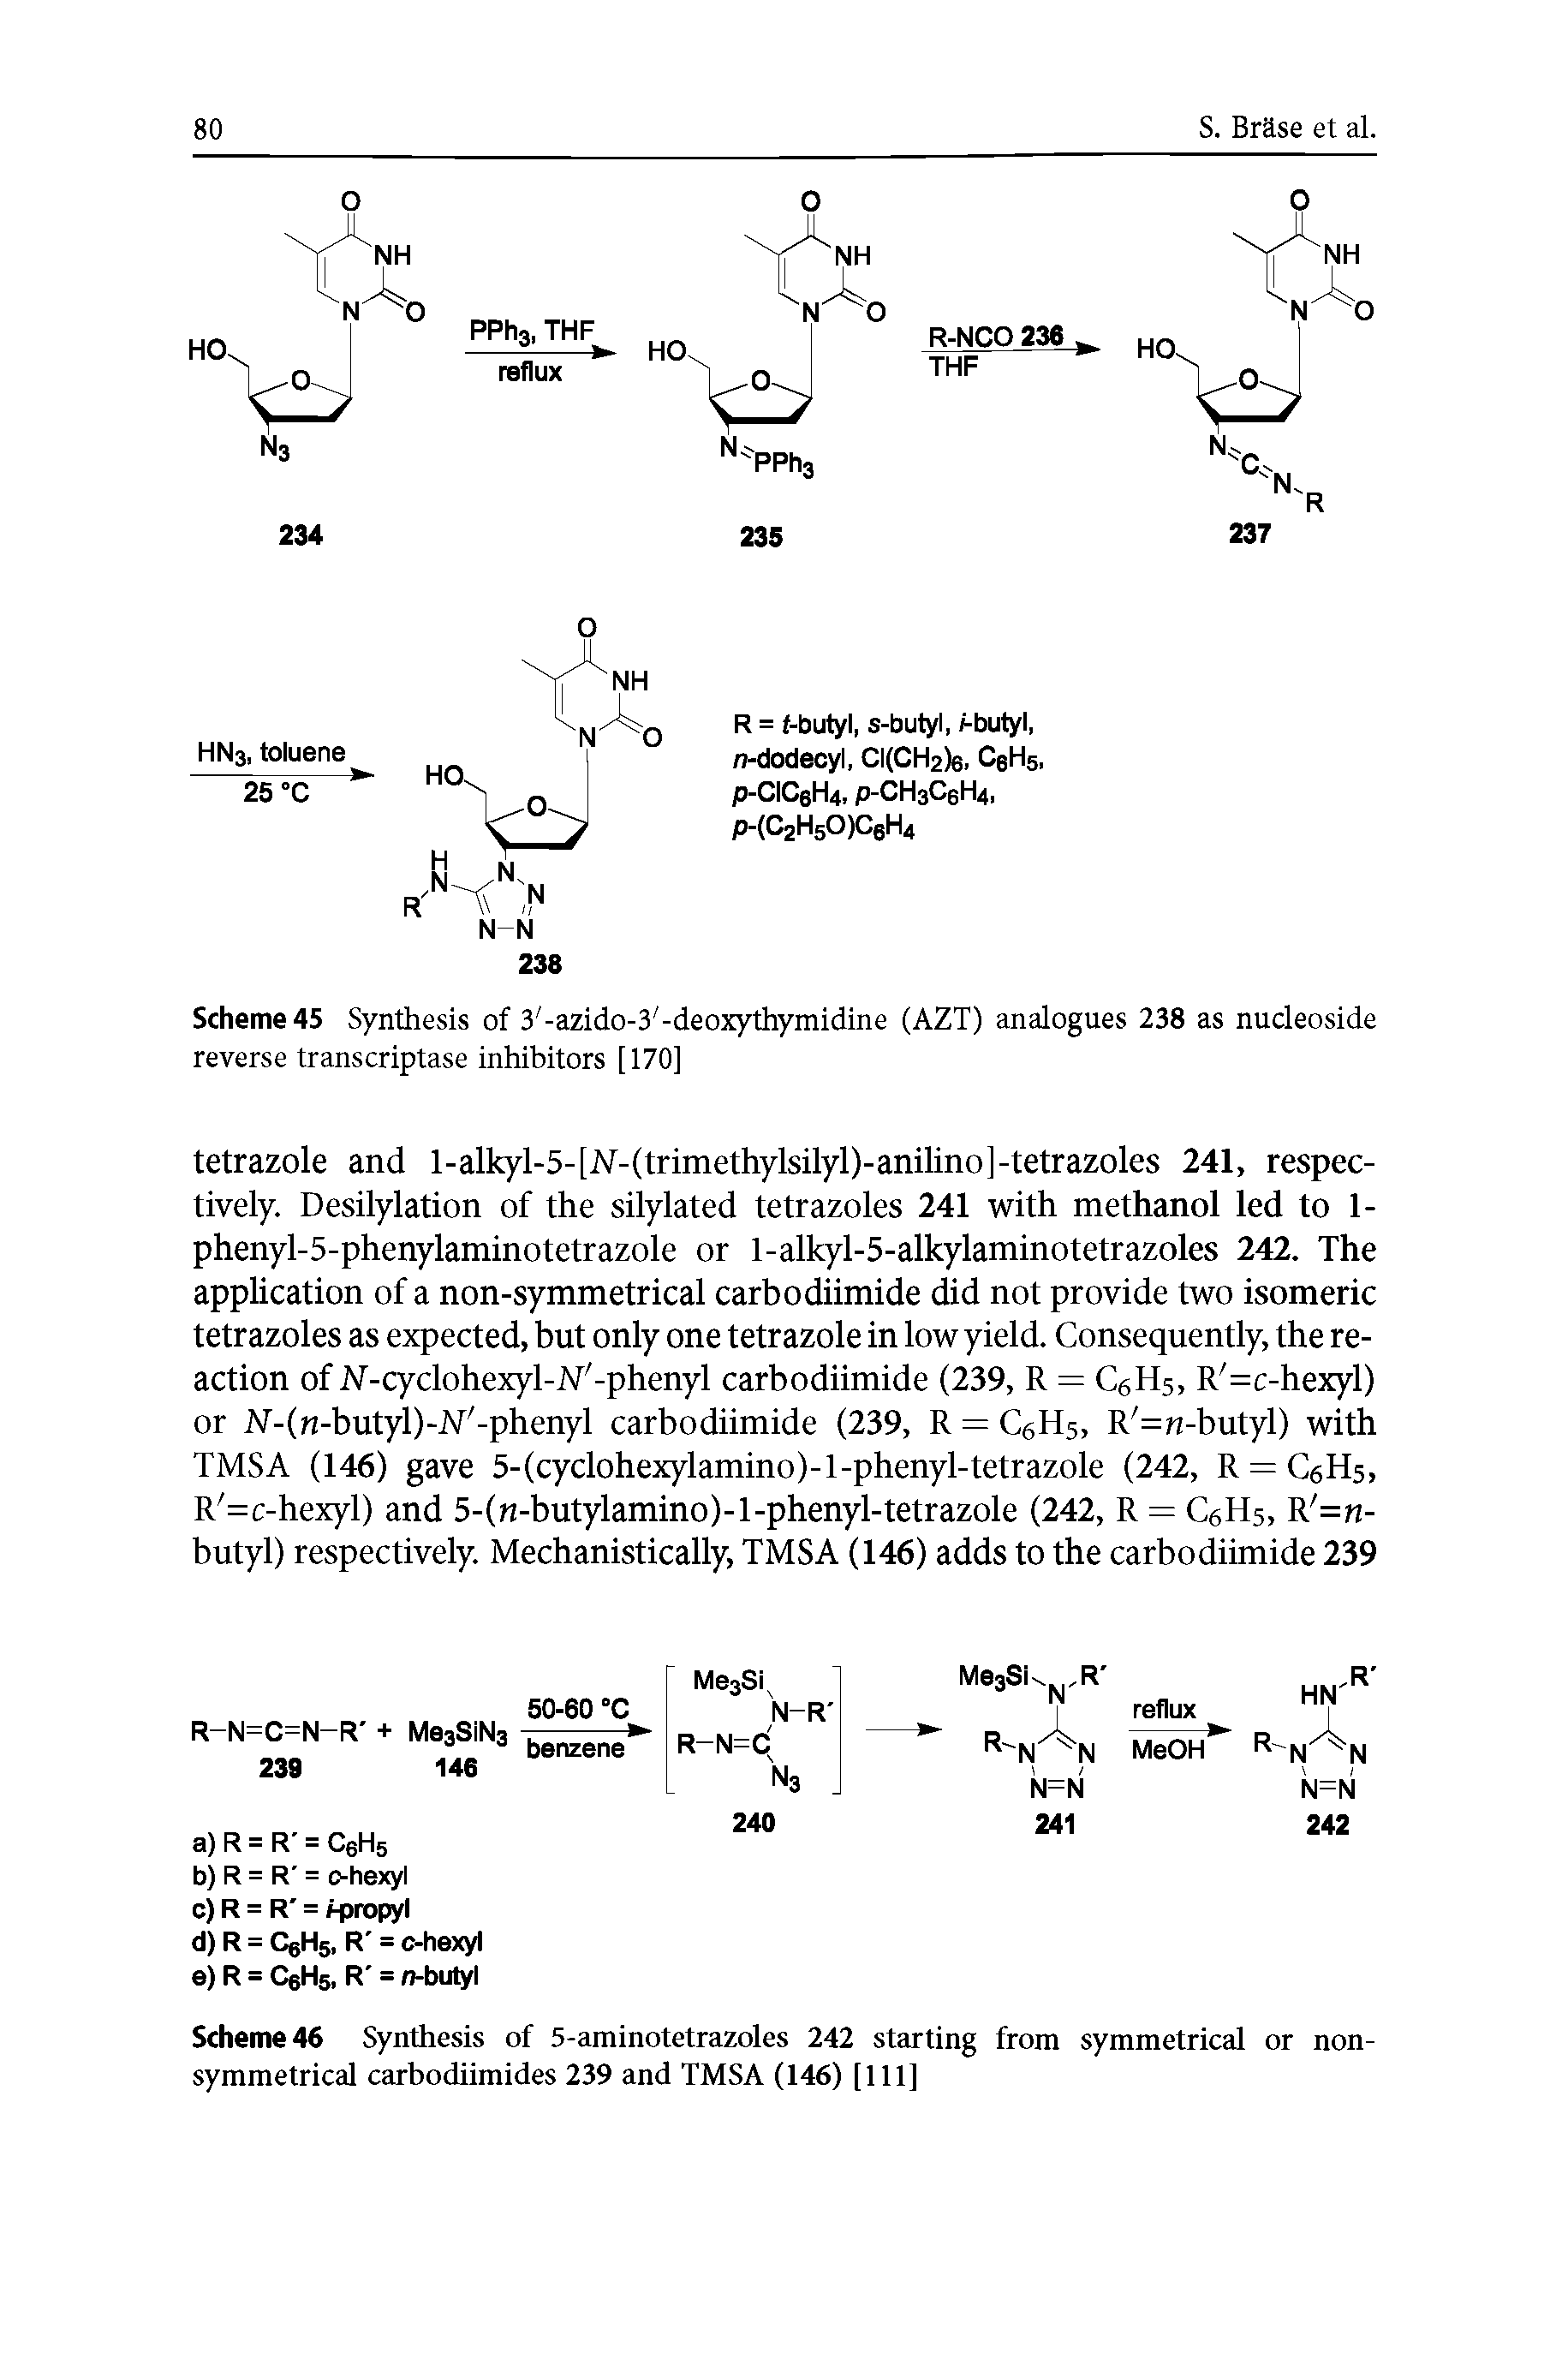 Scheme 46 Synthesis of 5-aminotetrazoles 242 starting from symmetrical or non-symmetrical carbodiimides 239 and TMSA (146) [111]...